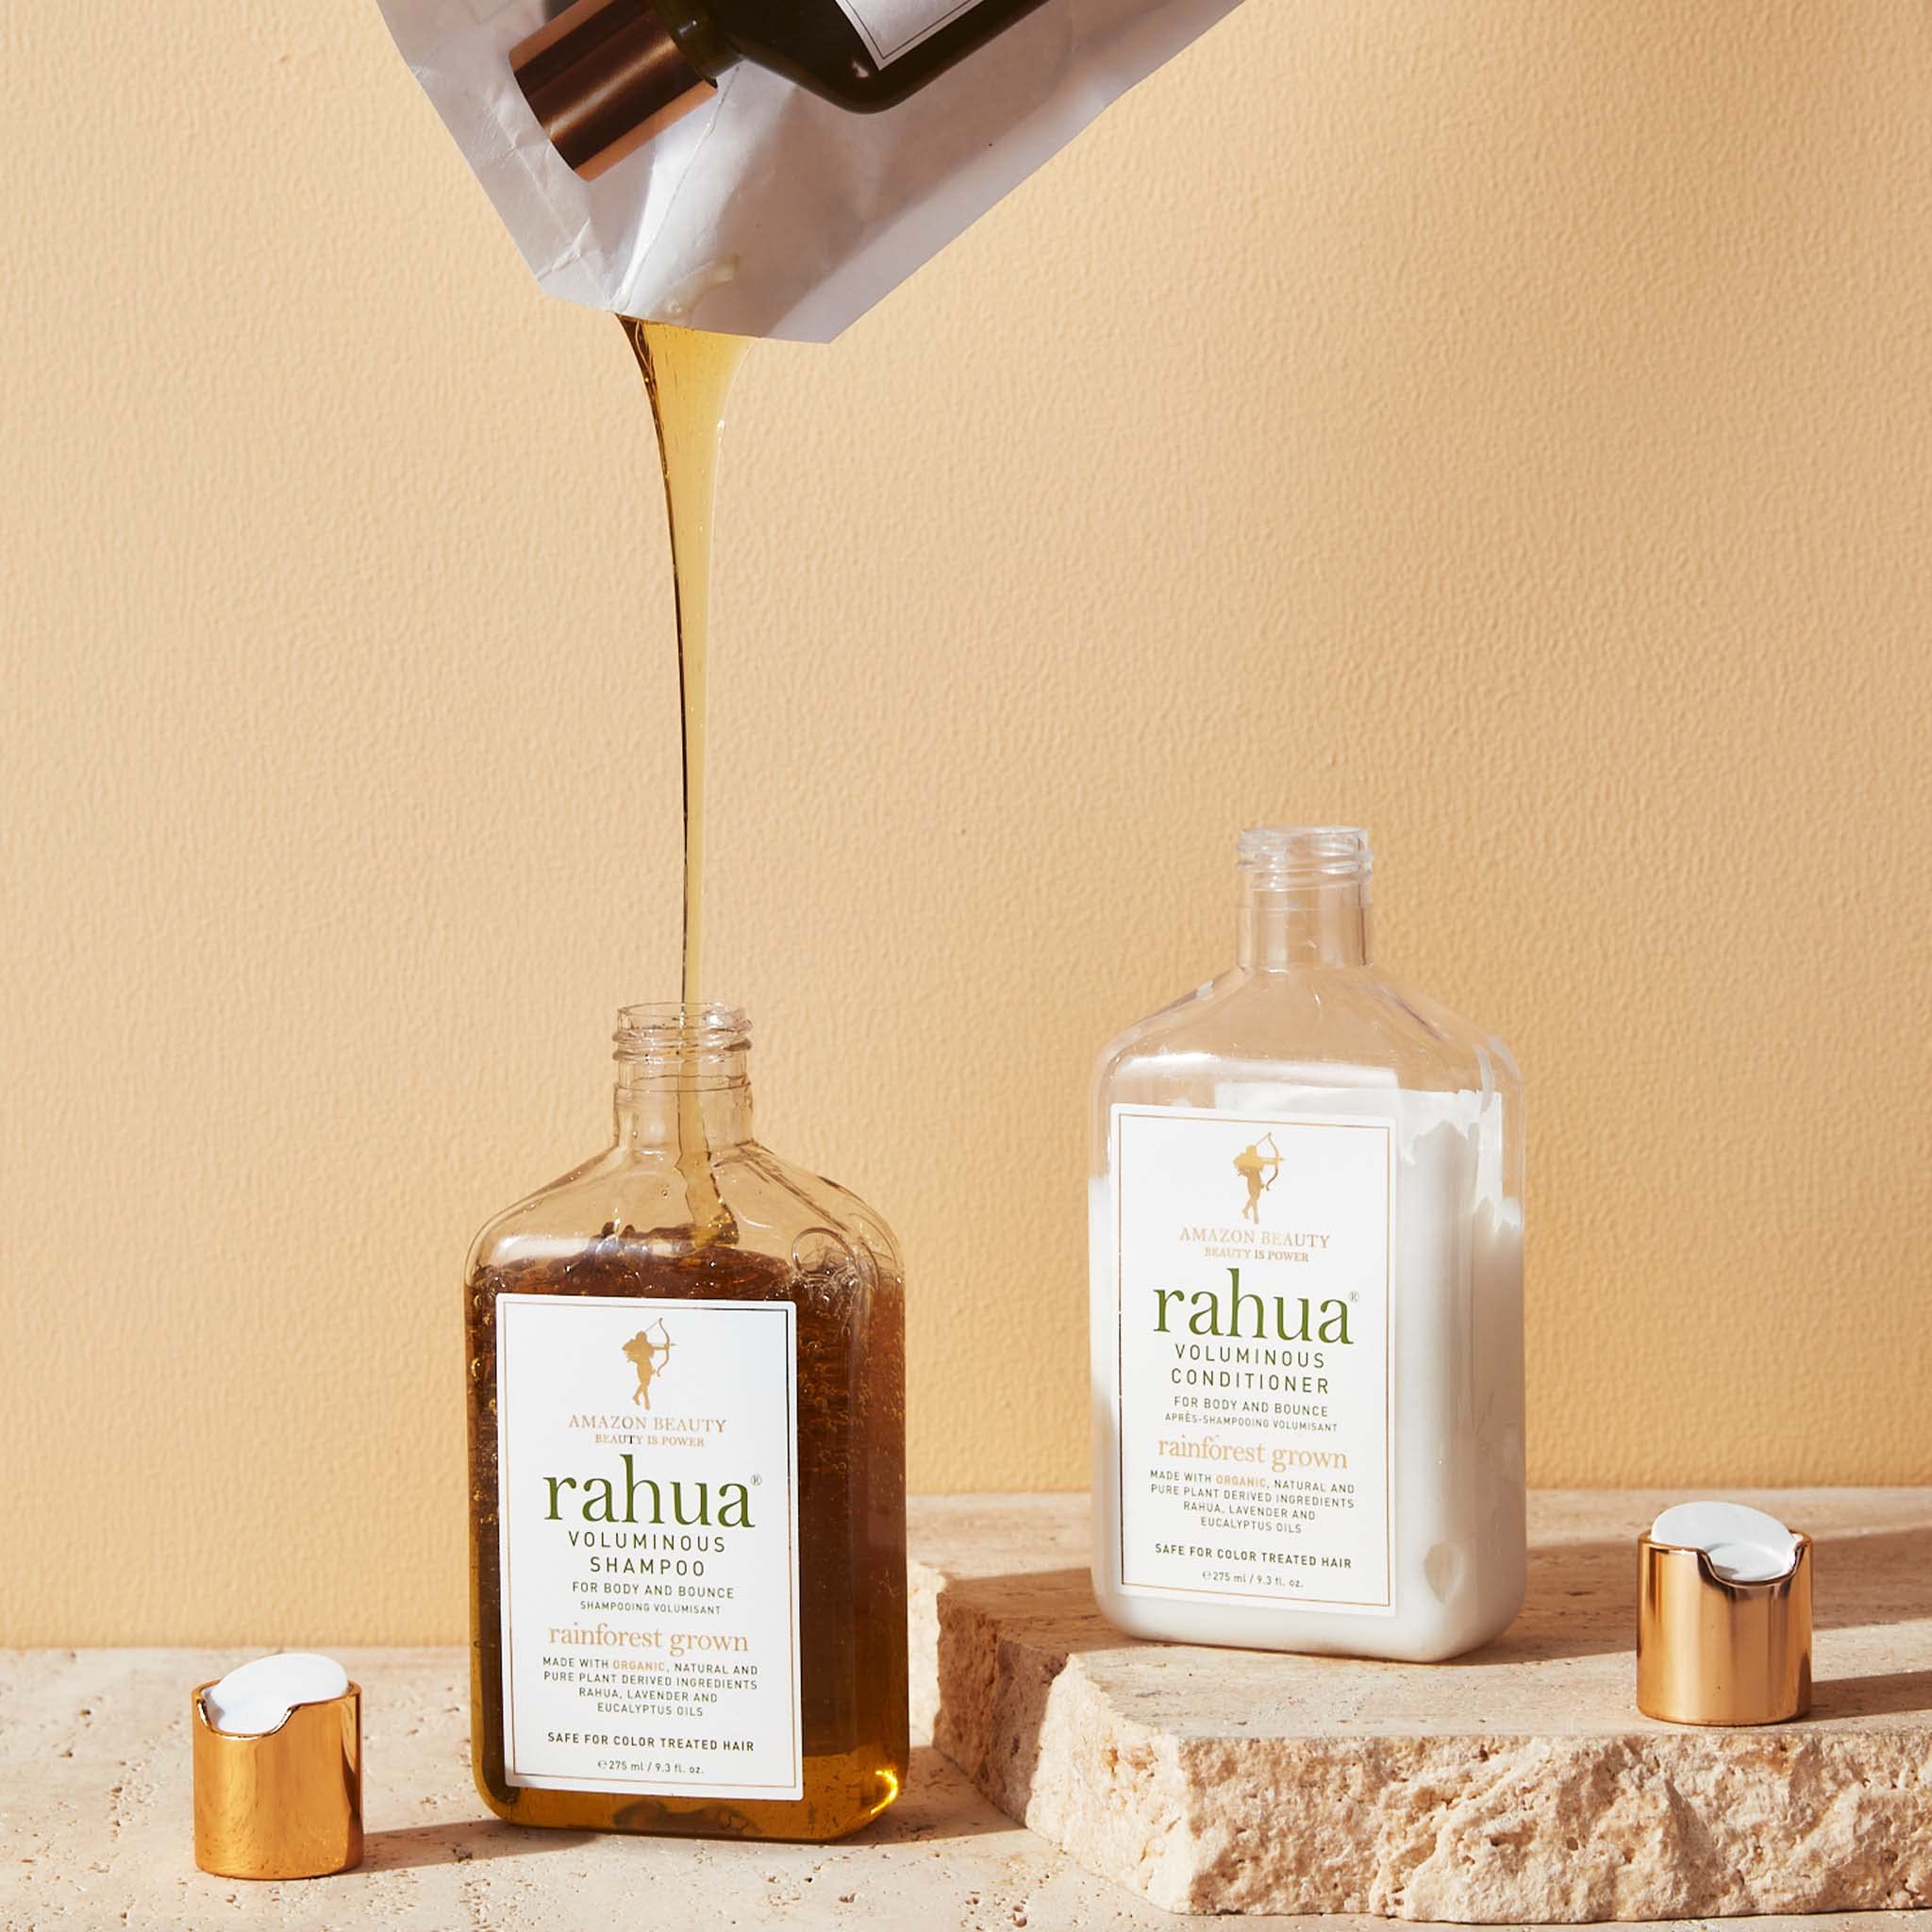 Rahua Voluminous Conditioner Refill 9.5 FlOz Conditioner Made with Organic, Natural and Plant Based Ingredients, Conditioner with Lavender and Eucalyptus Aroma, Best for Fine and/or Oily Hair